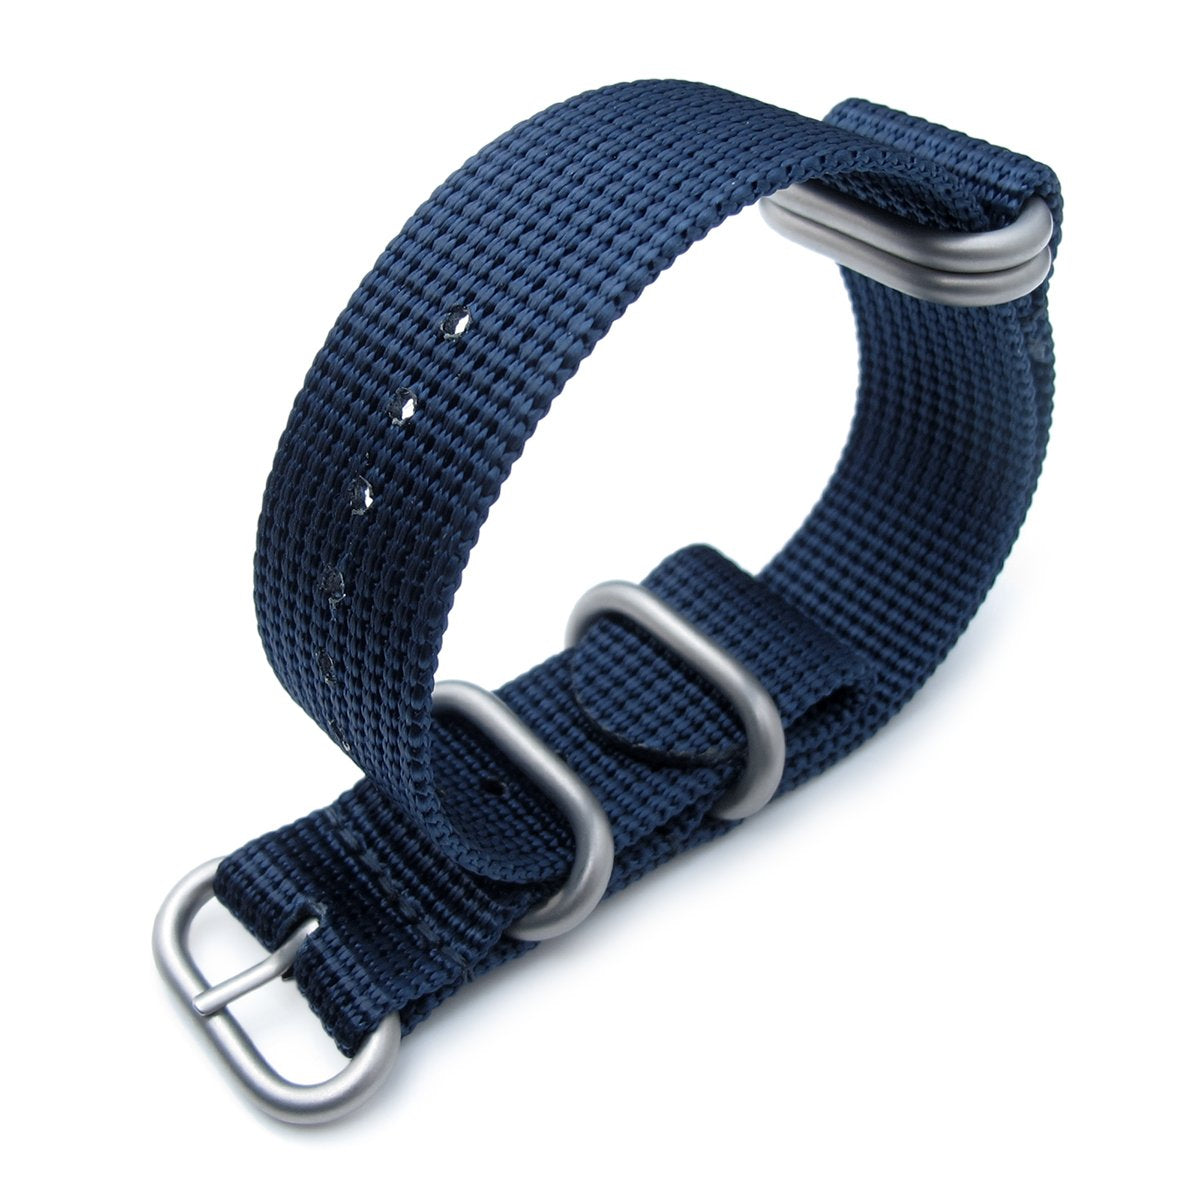 MiLTAT 20mm 22mm 5 Rings G10 Zulu Water Repellent 3D Nylon Navy Blue Brushed Strapcode Watch Bands